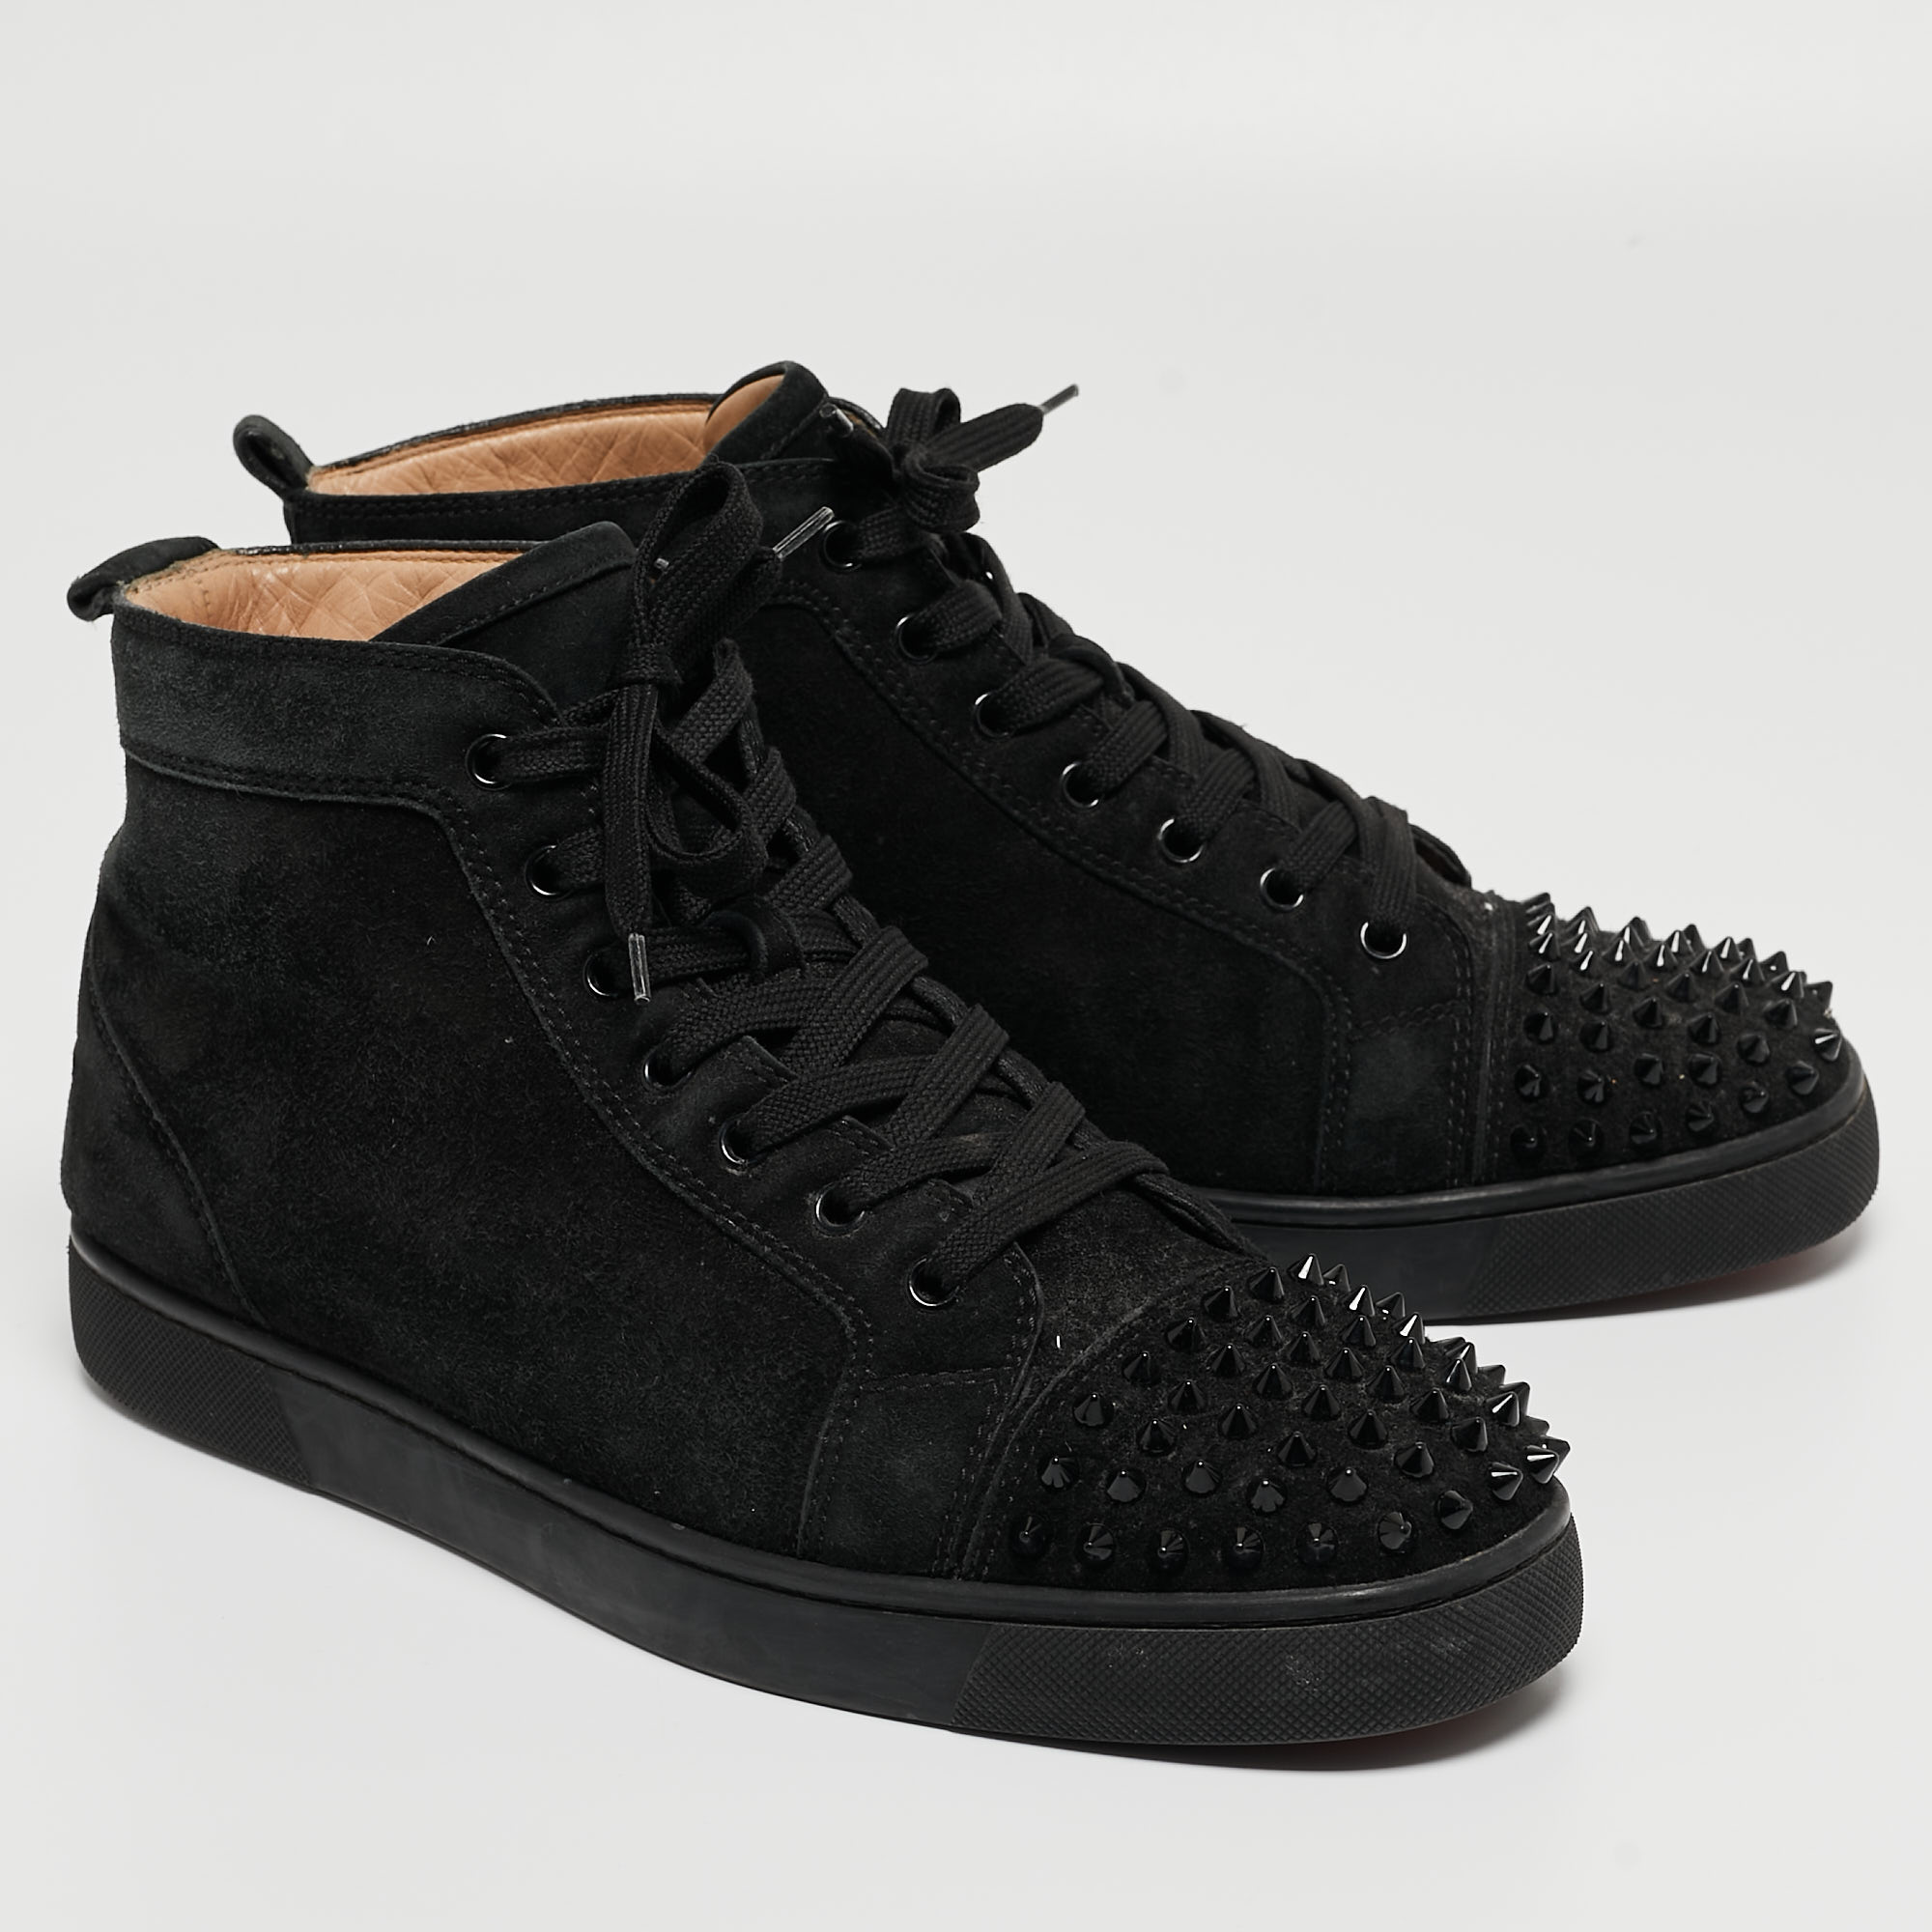 Christian Louboutin Black Suede Lou Spikes High Top Sneakers Size 42